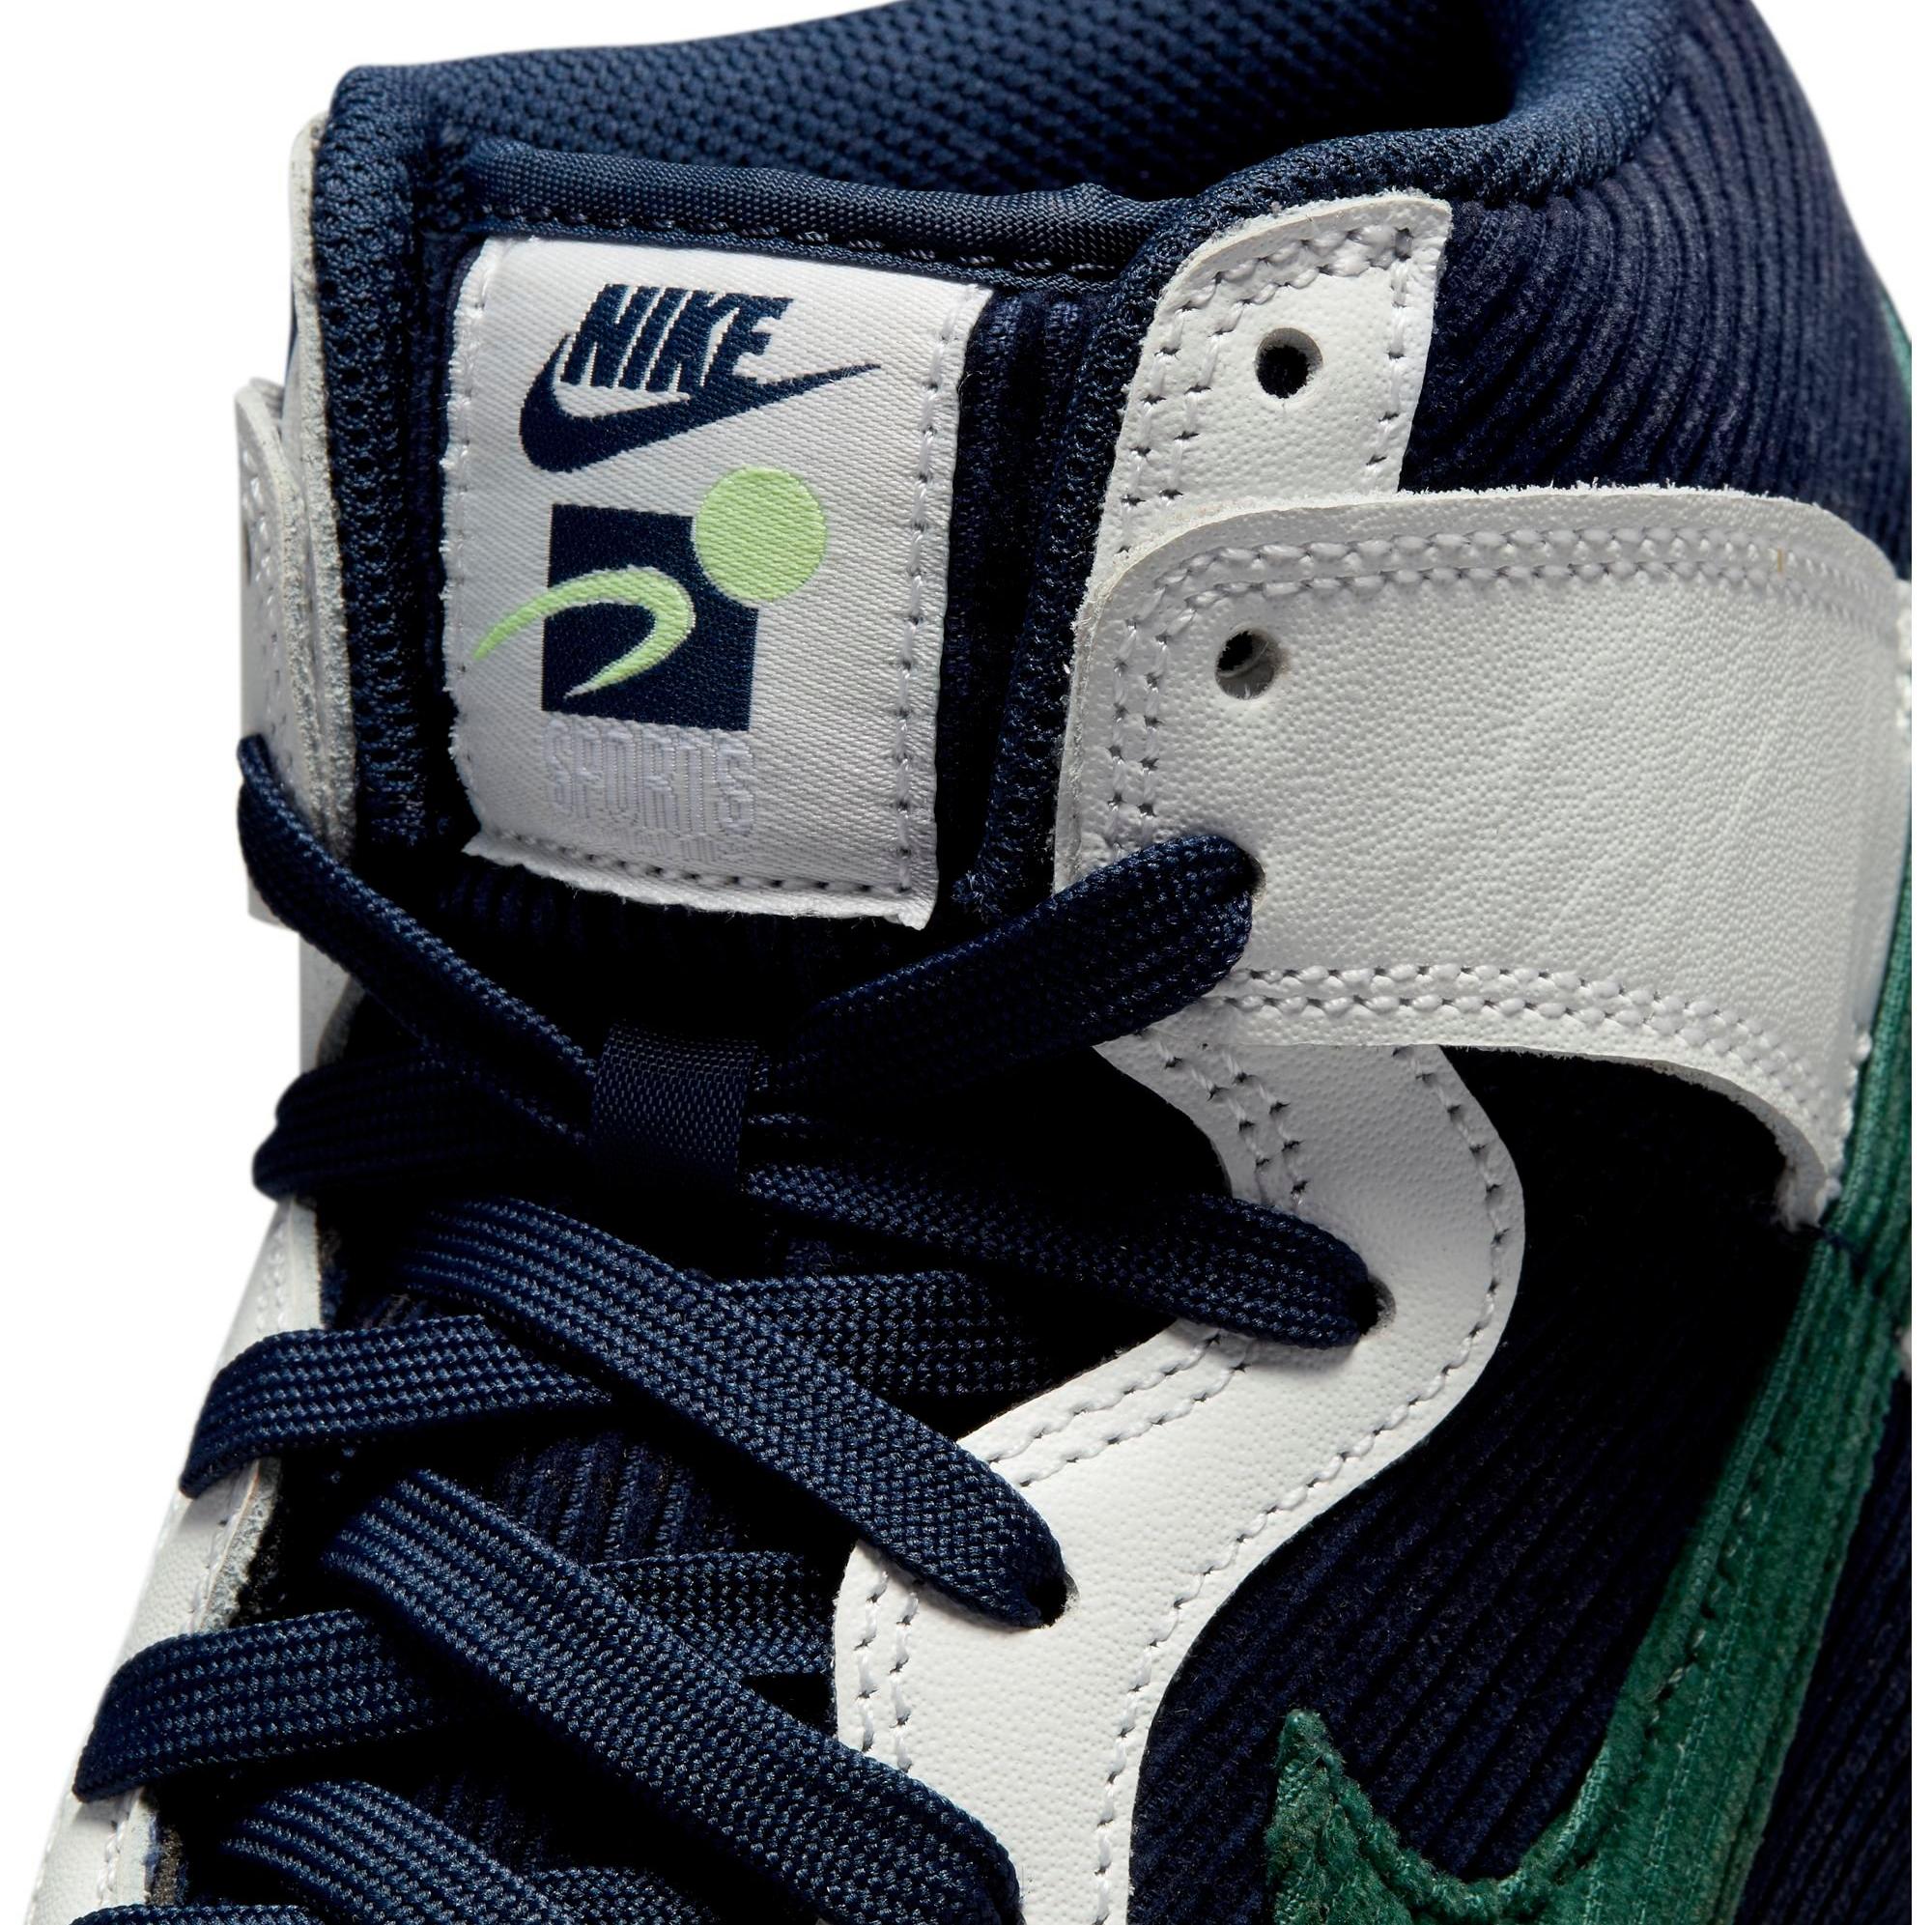 Sneakers Release – Nike Dunk High EMB “Sports 